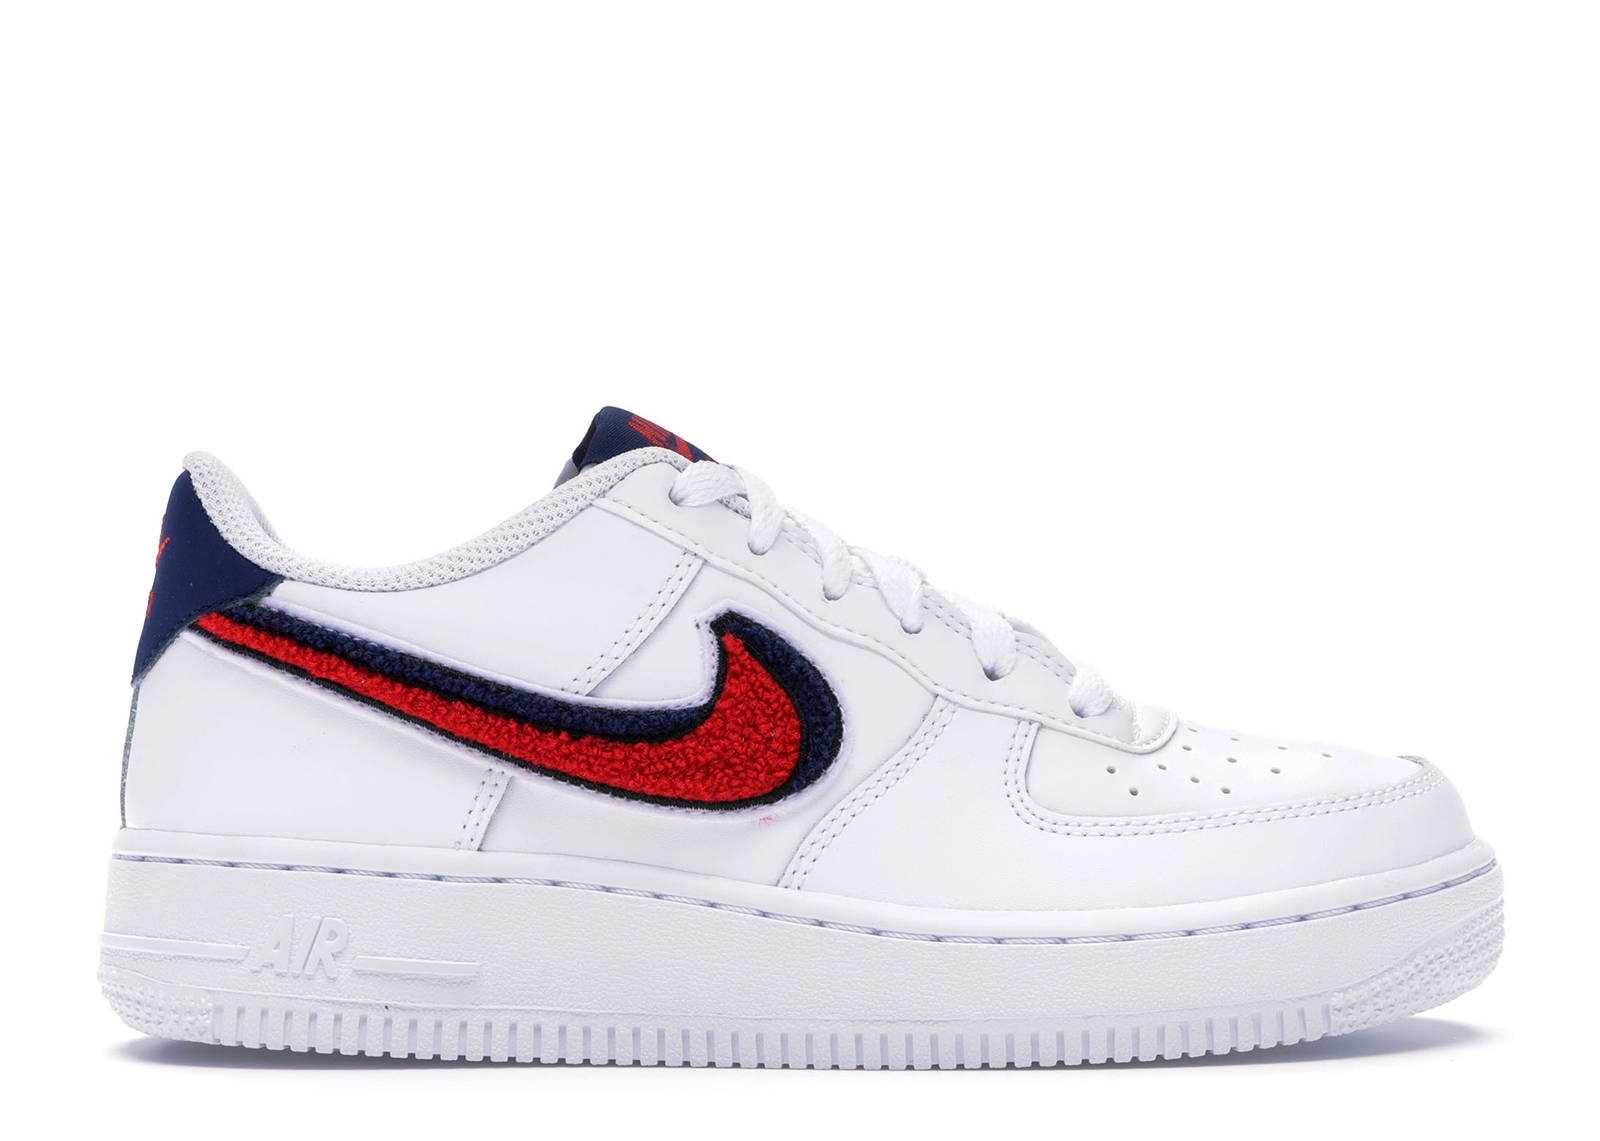 Nike Air Force 1 Low 3D Chenille Swoosh USA (GS) - AO3620-101